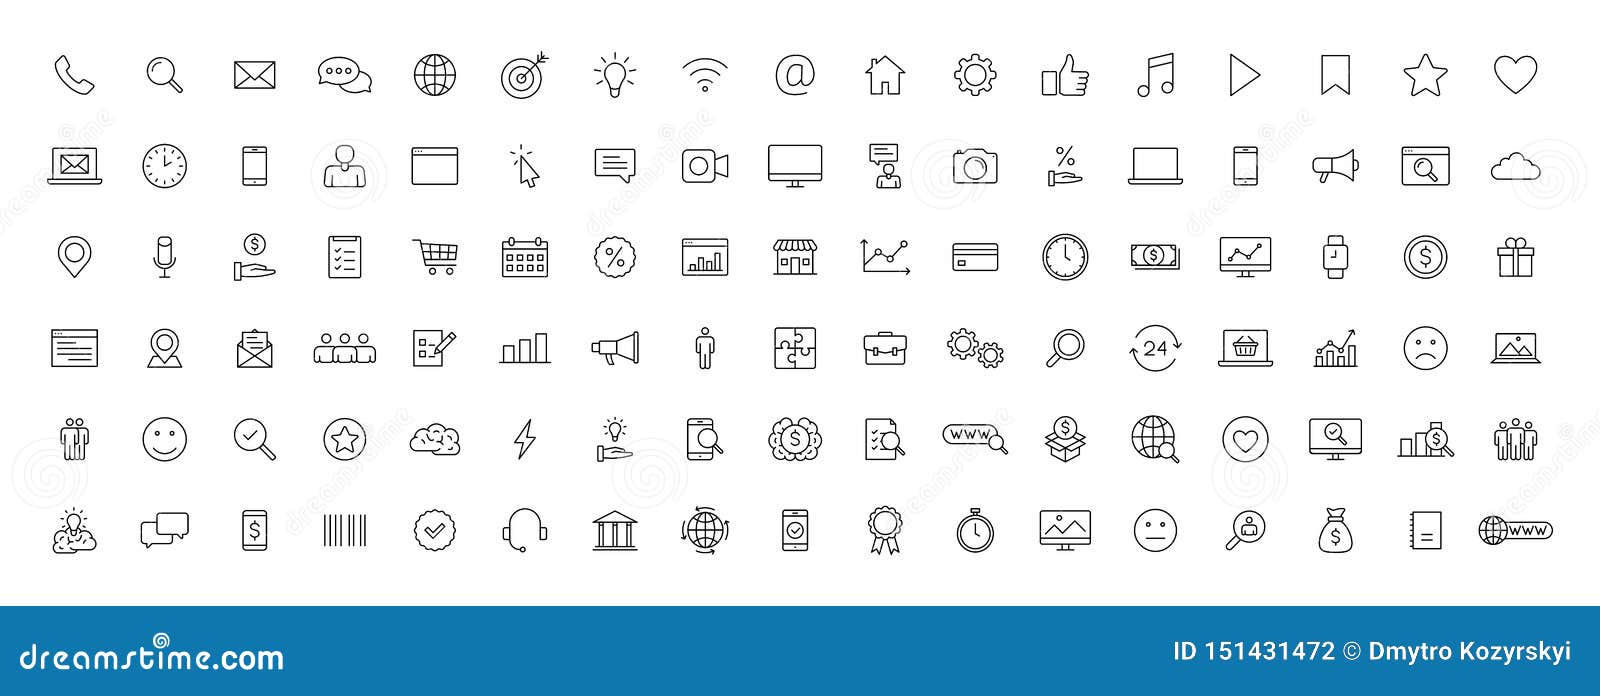 big set of 100 business and finance web icons in line style. money, bank, contact, office, payment, strategy, accounting,